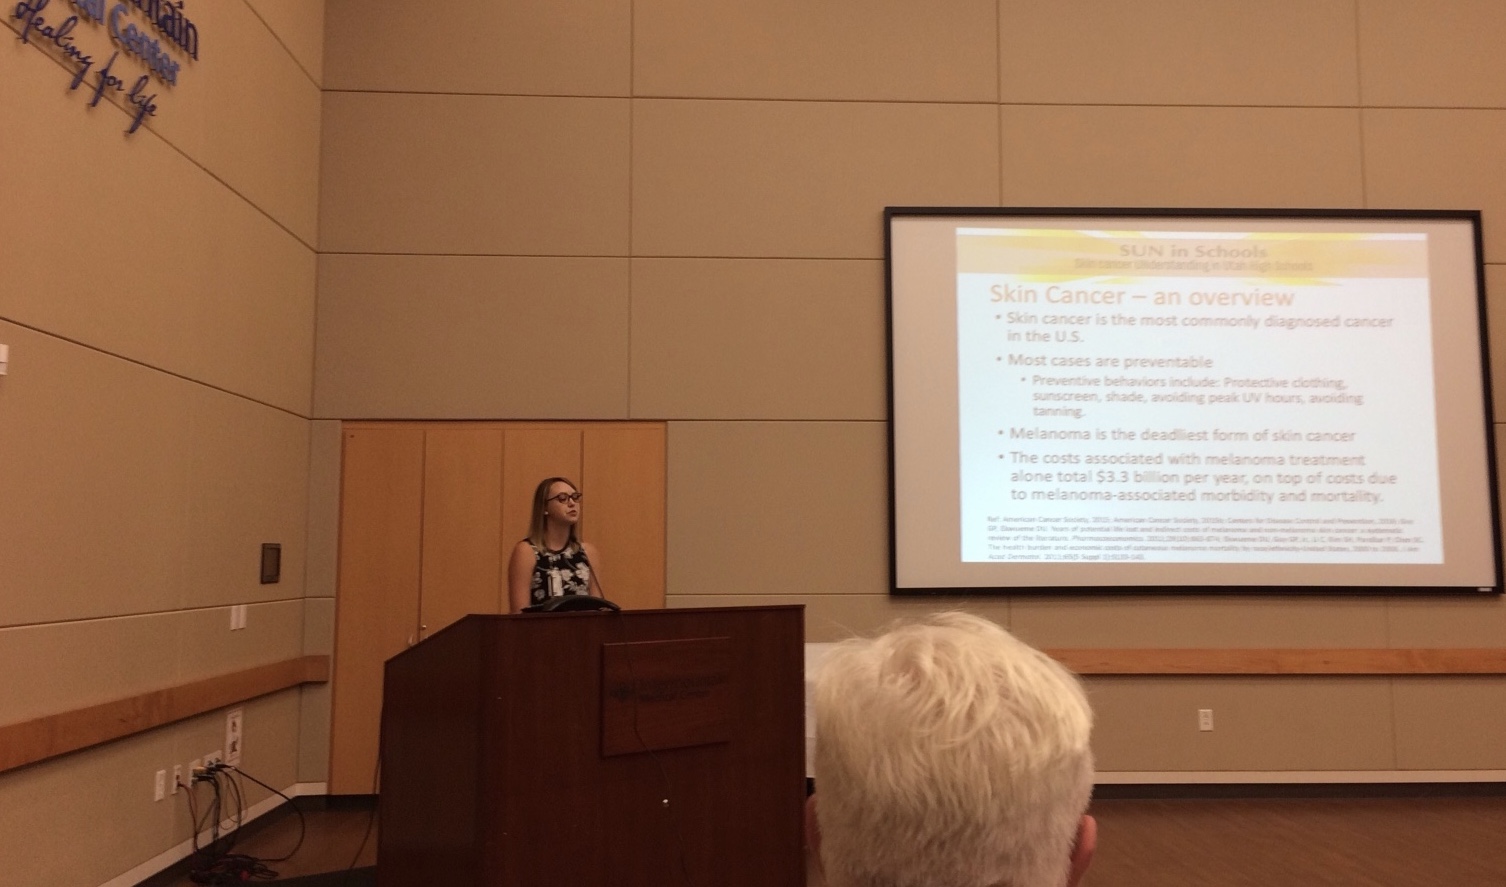 Bridget Parsons presents on the SUN in Schools Program at the general committee meeting of the Utah Cancer Action Network.